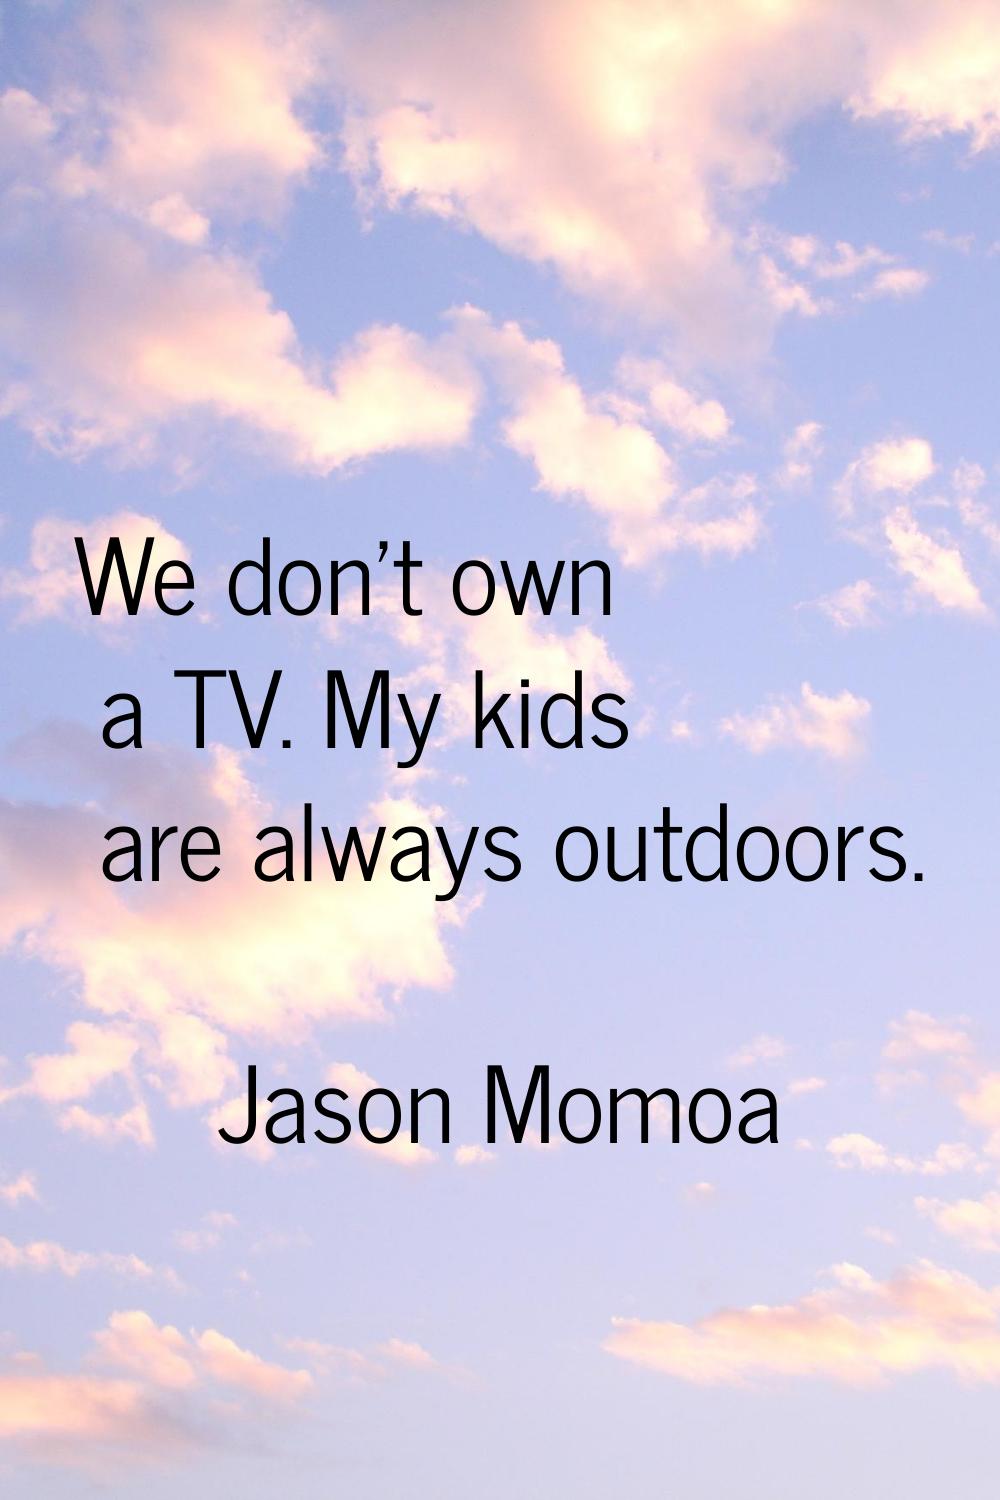 We don't own a TV. My kids are always outdoors.